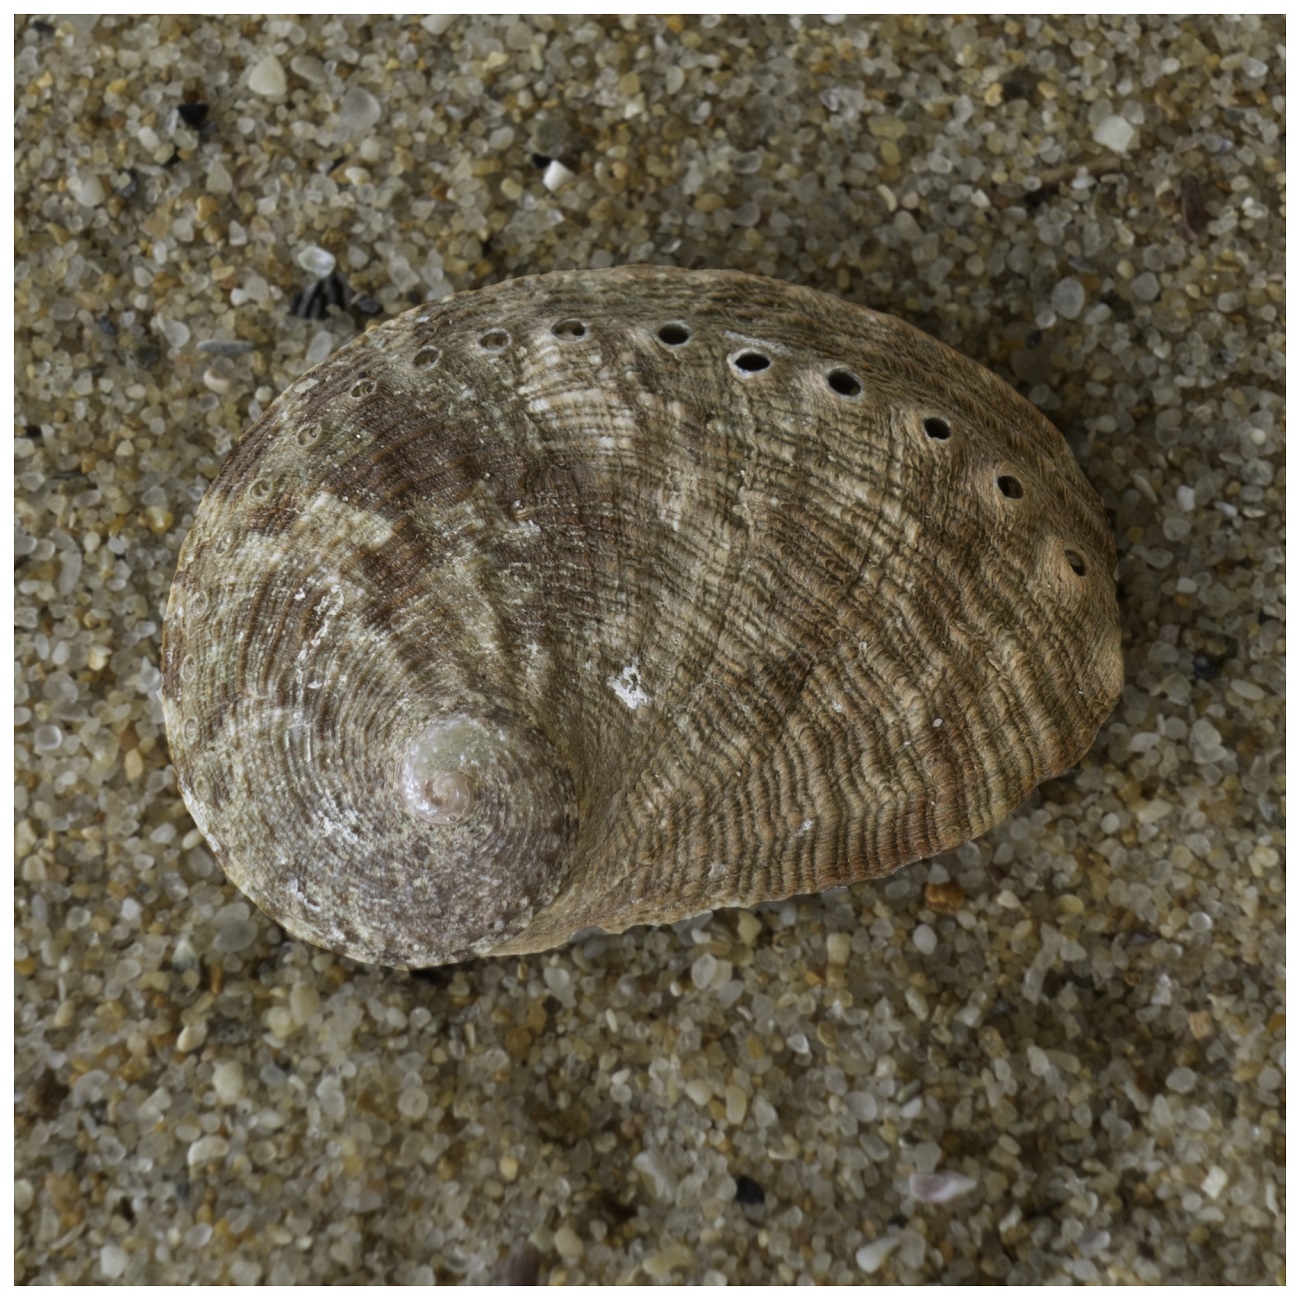 Weekly Creature Feature. Do you recognize this shell?  Can you name it?